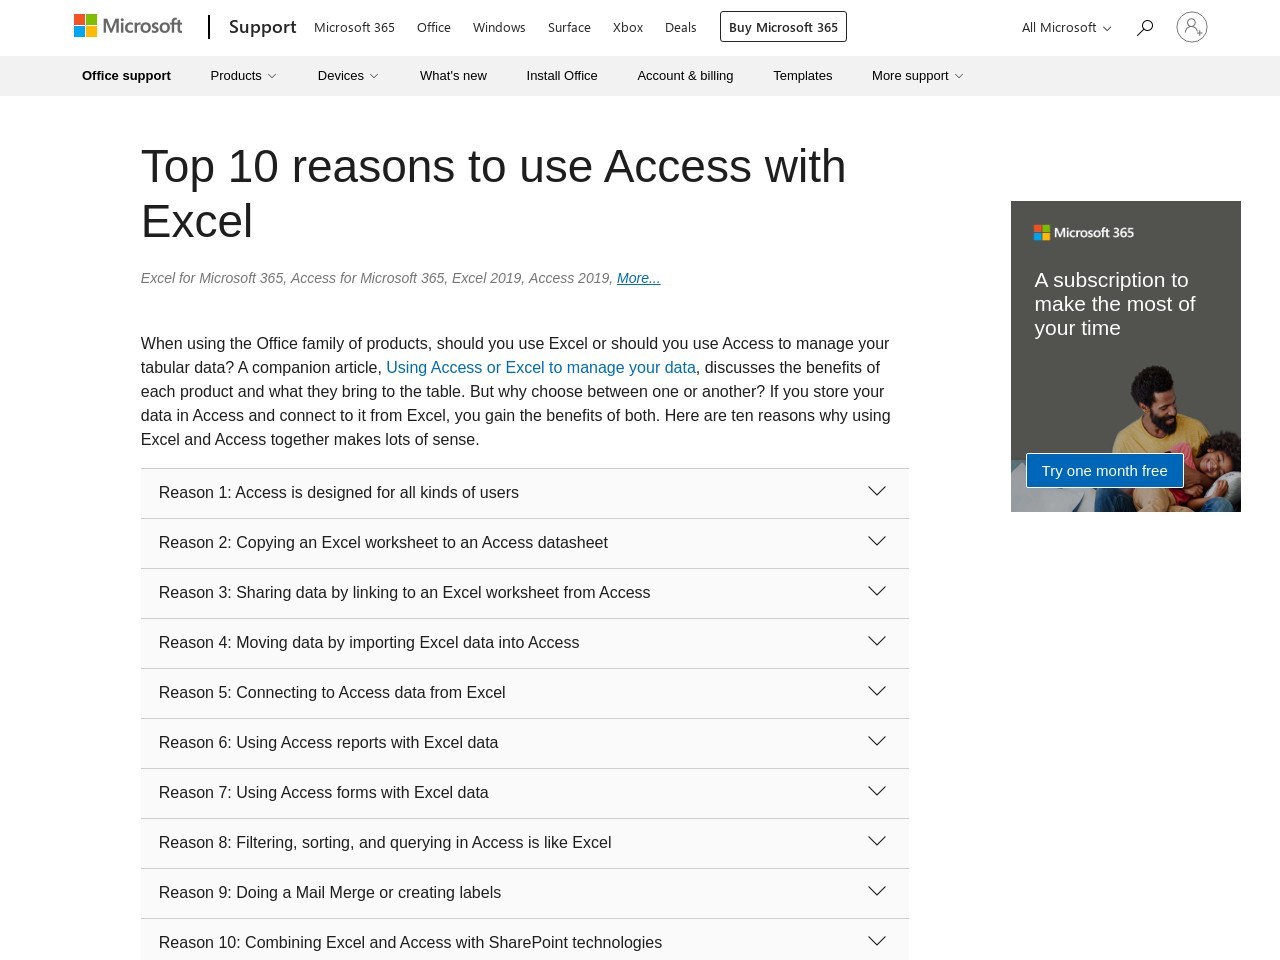 Top 10 reasons to use Access with Excel - Office Support